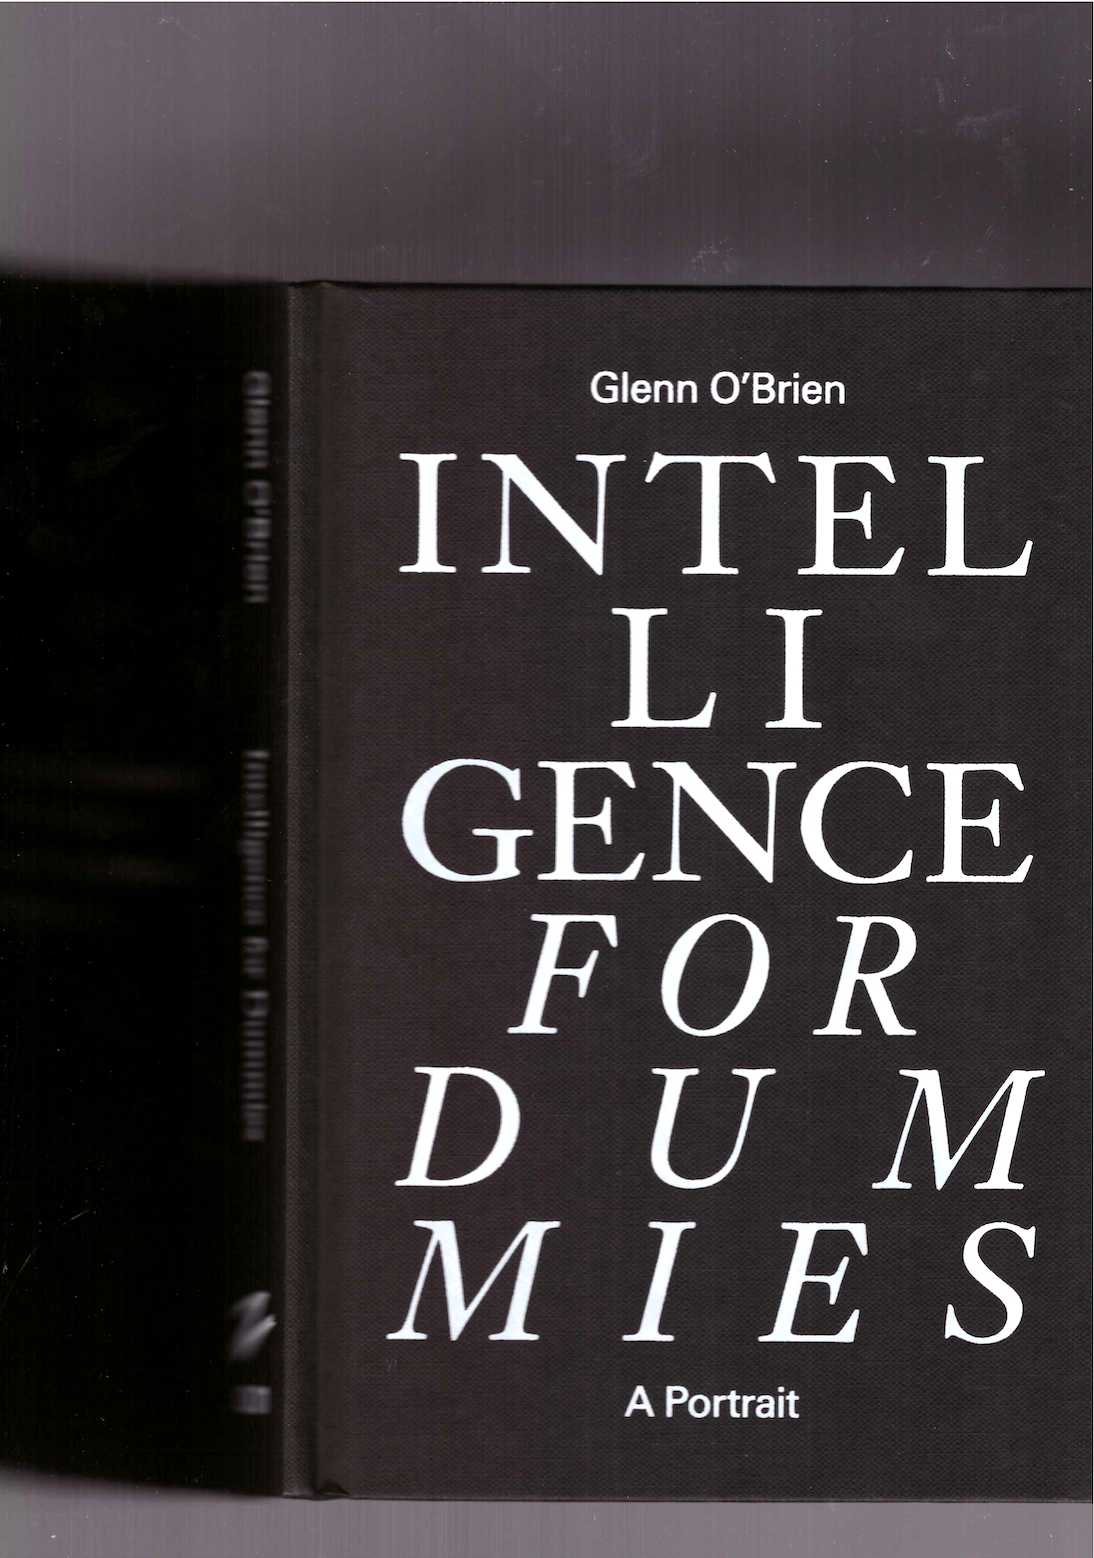 O’BRIEN, Glenn - Intelligence for Dummies: Essays and Other Collected Writings